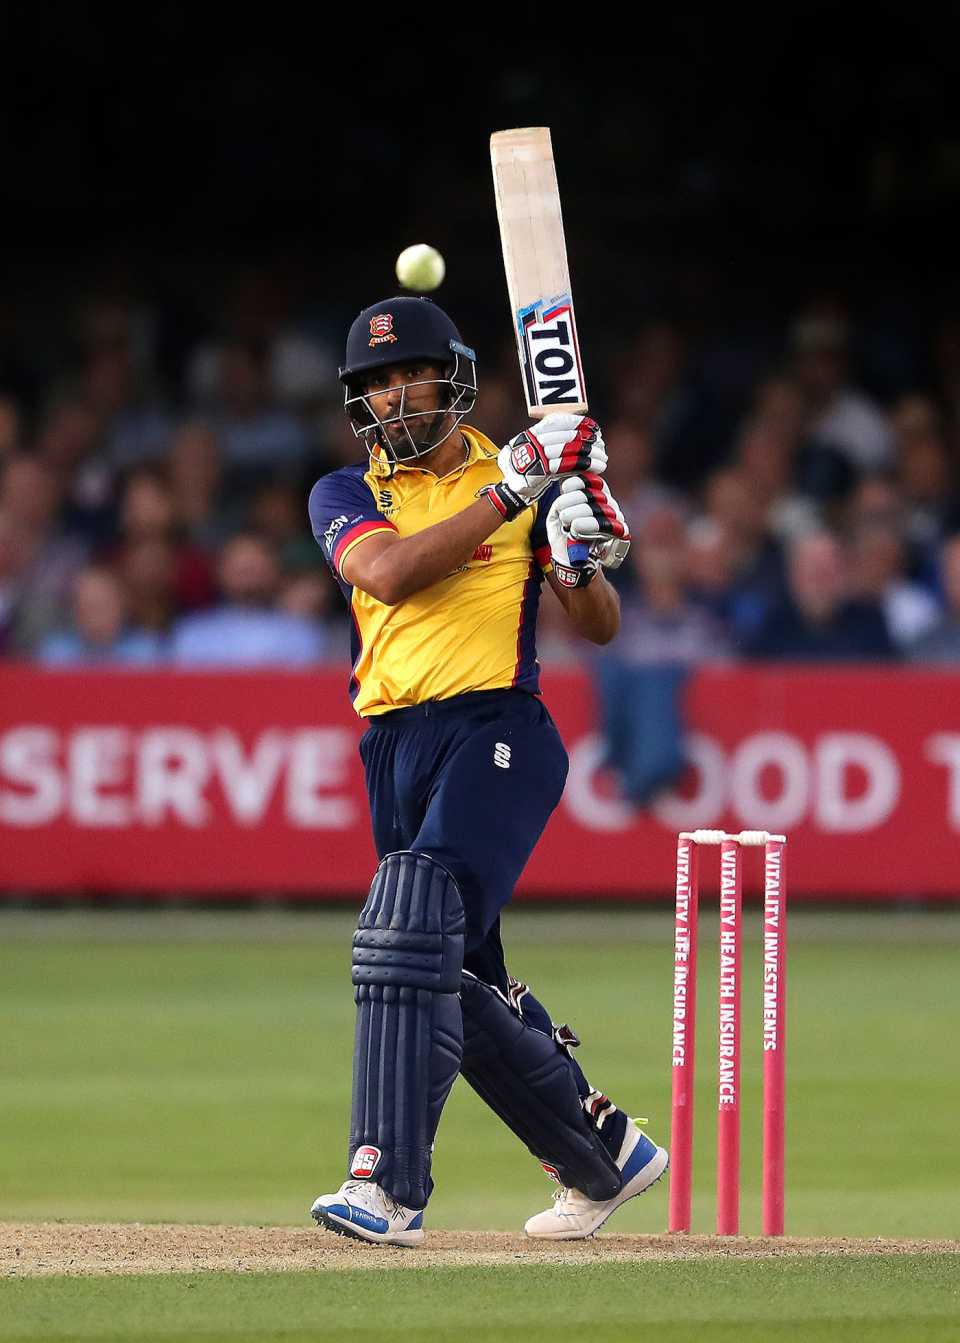 Ravi Bopara has been left frustrated after spending the season at number six